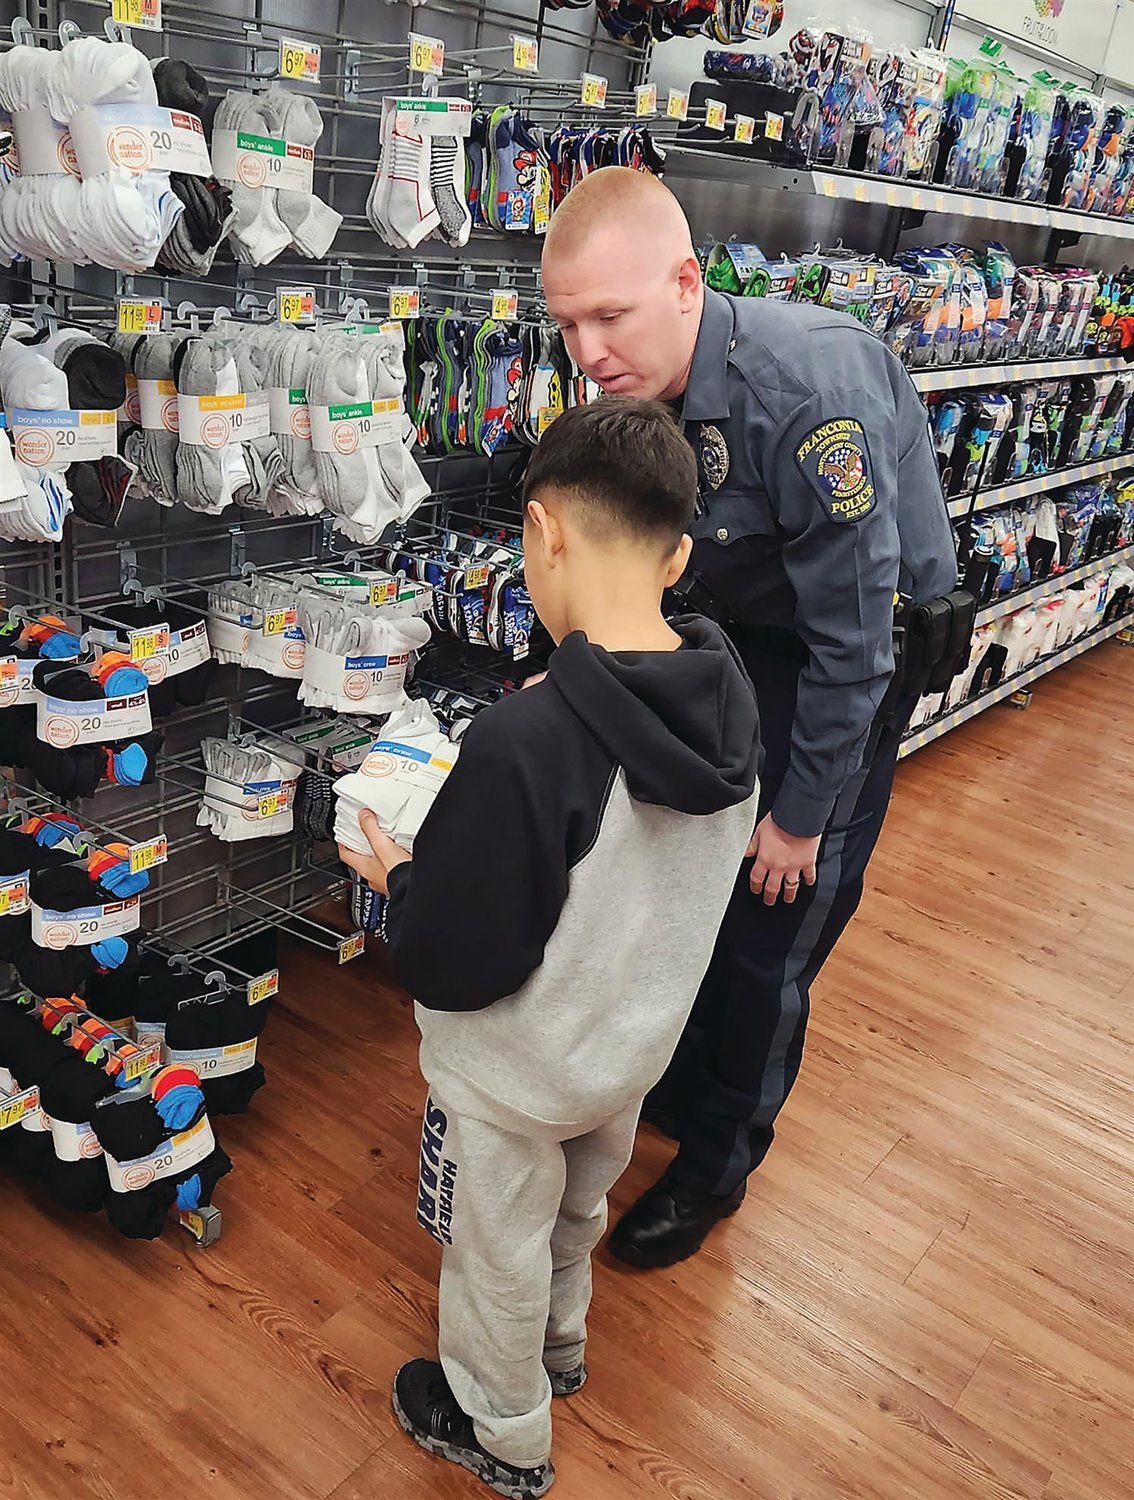 A Franconia police officer helps a child shop for socks and other items.